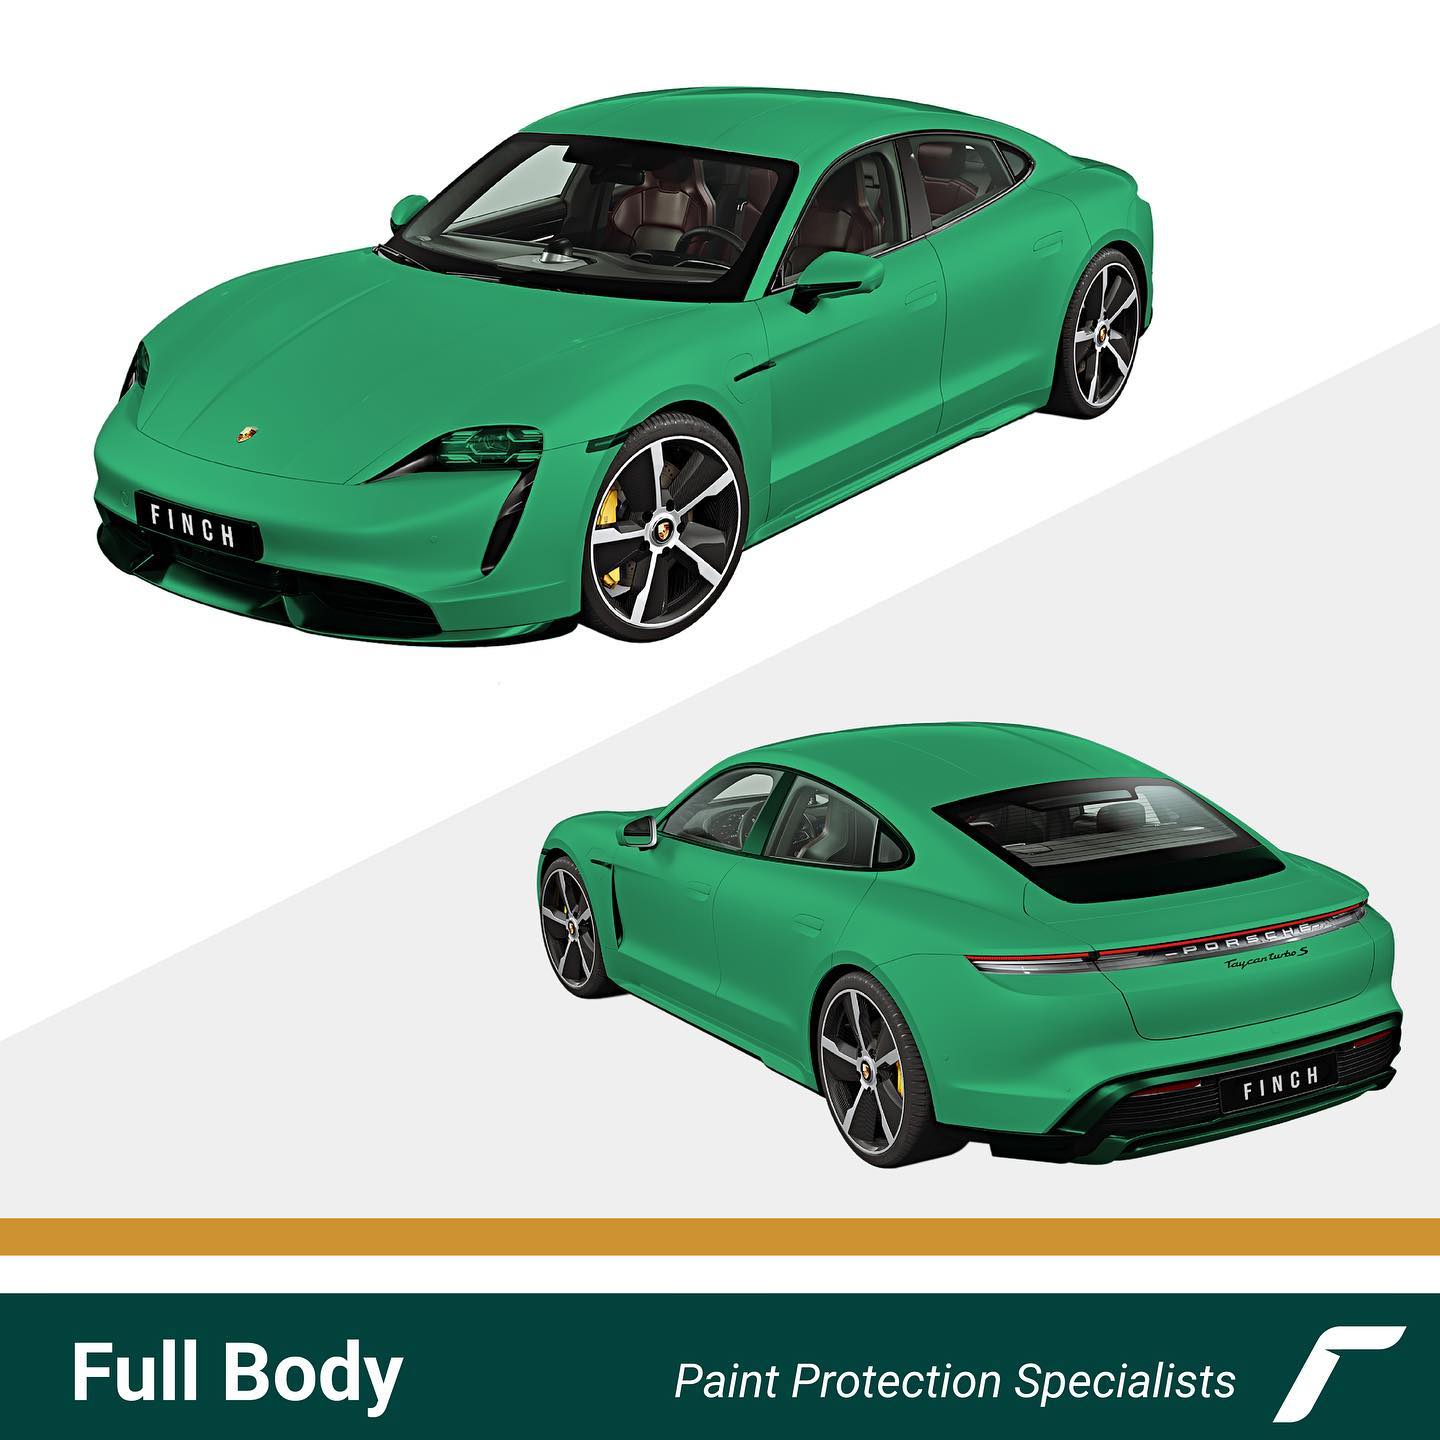 Green sports car showcased from two angles with full body paint protection advertisement.